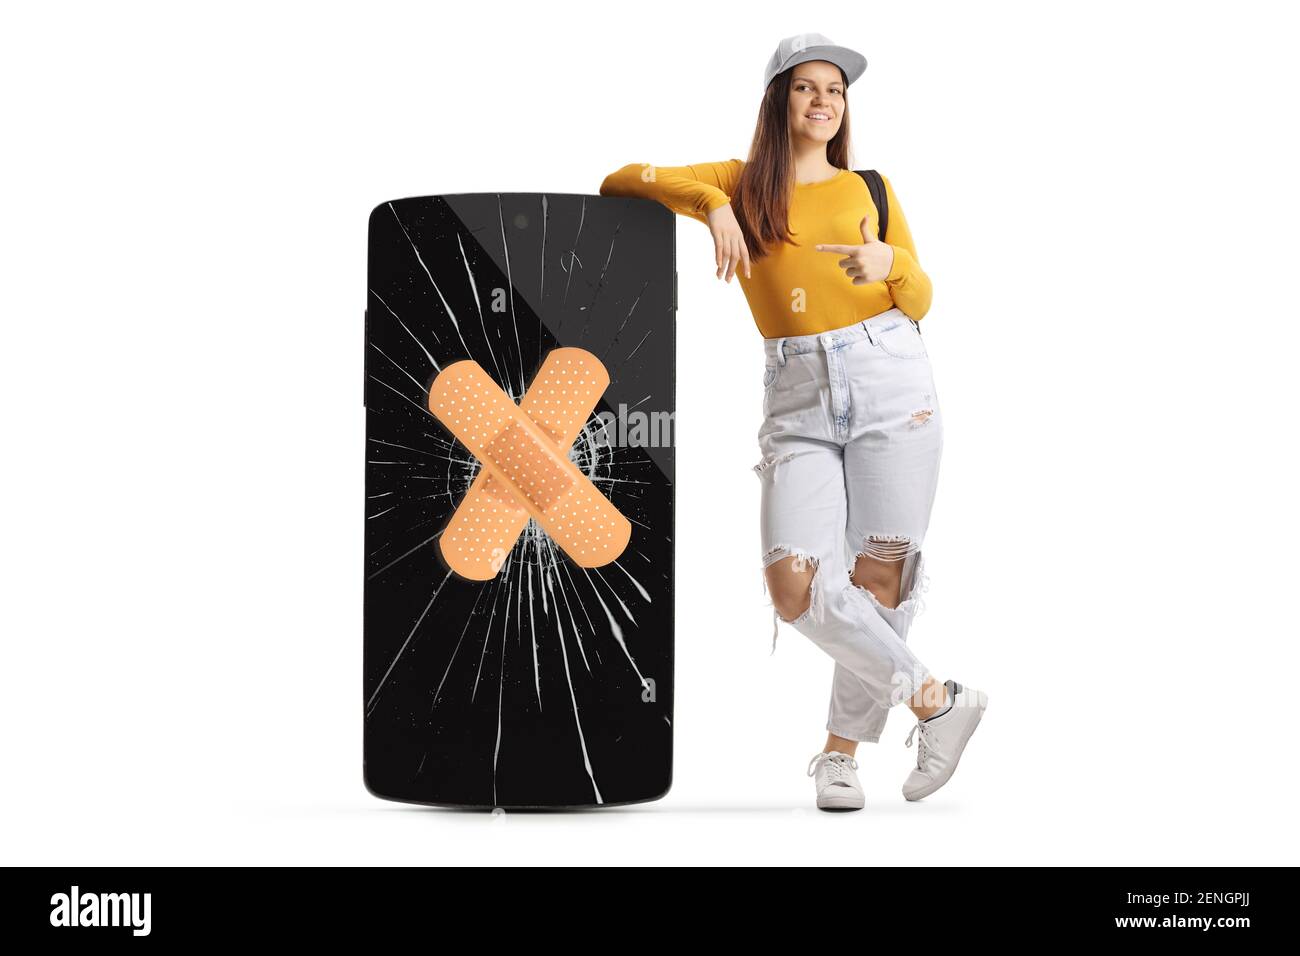 Full length portrait of a female student leaning on a phone with cracked screen and bandage and pointing isolated on white background Stock Photo